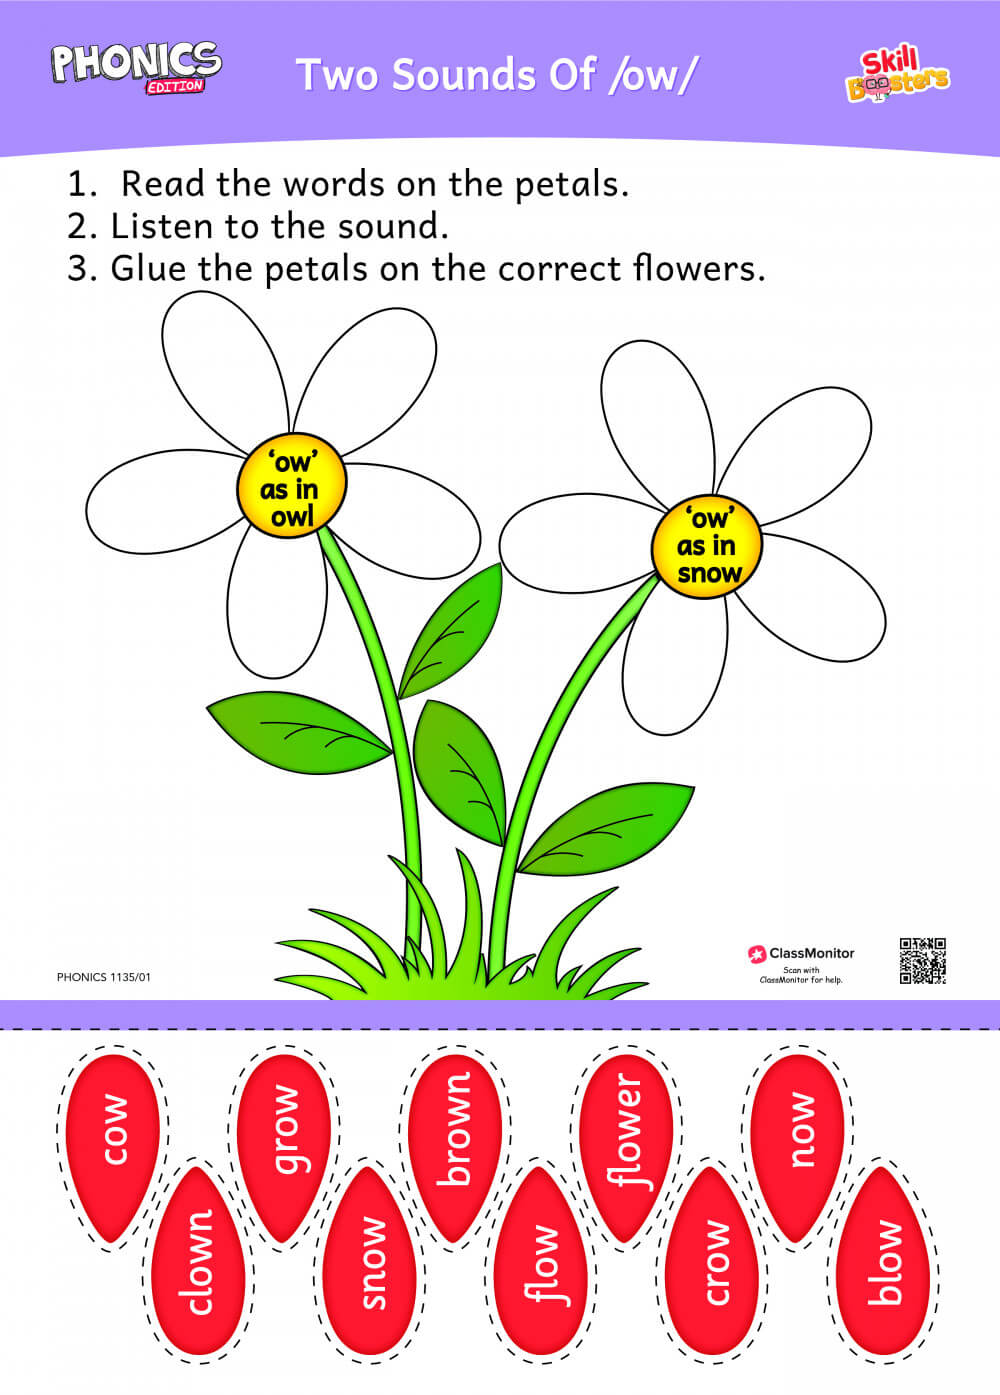 Worksheets - Two Sounds of "ow"